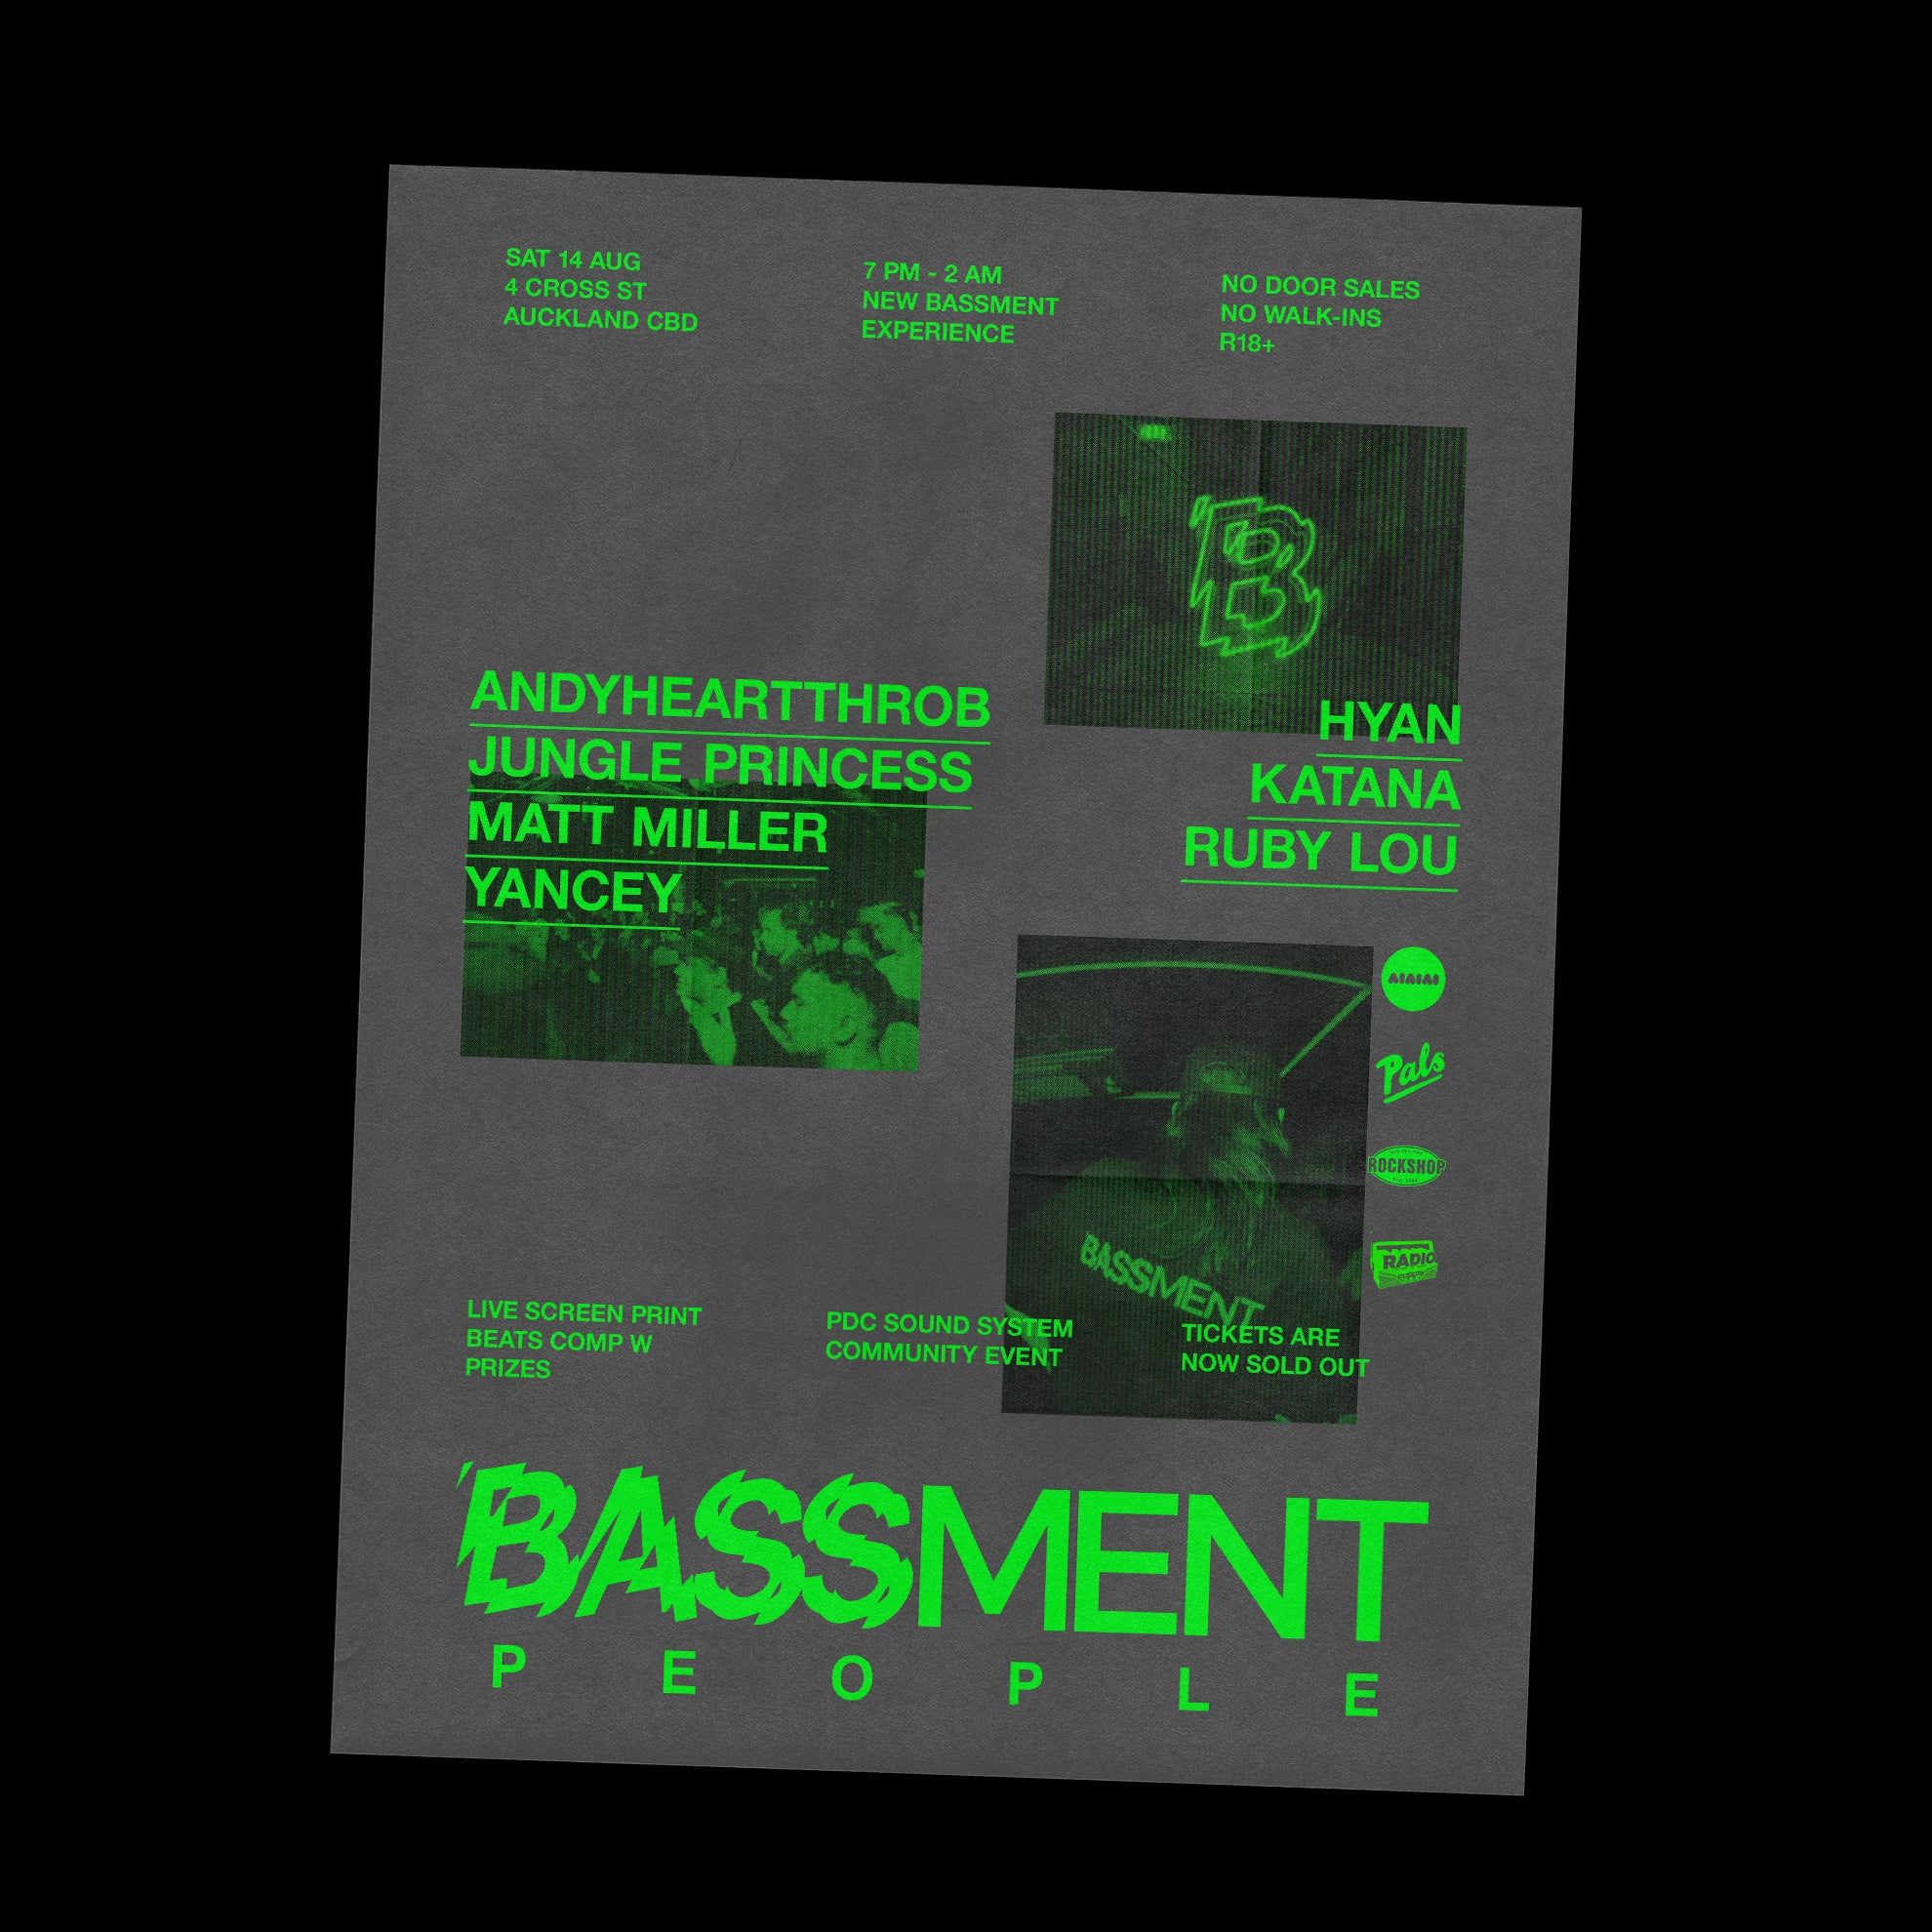 [EVENT] BASSMENT PEOPLE